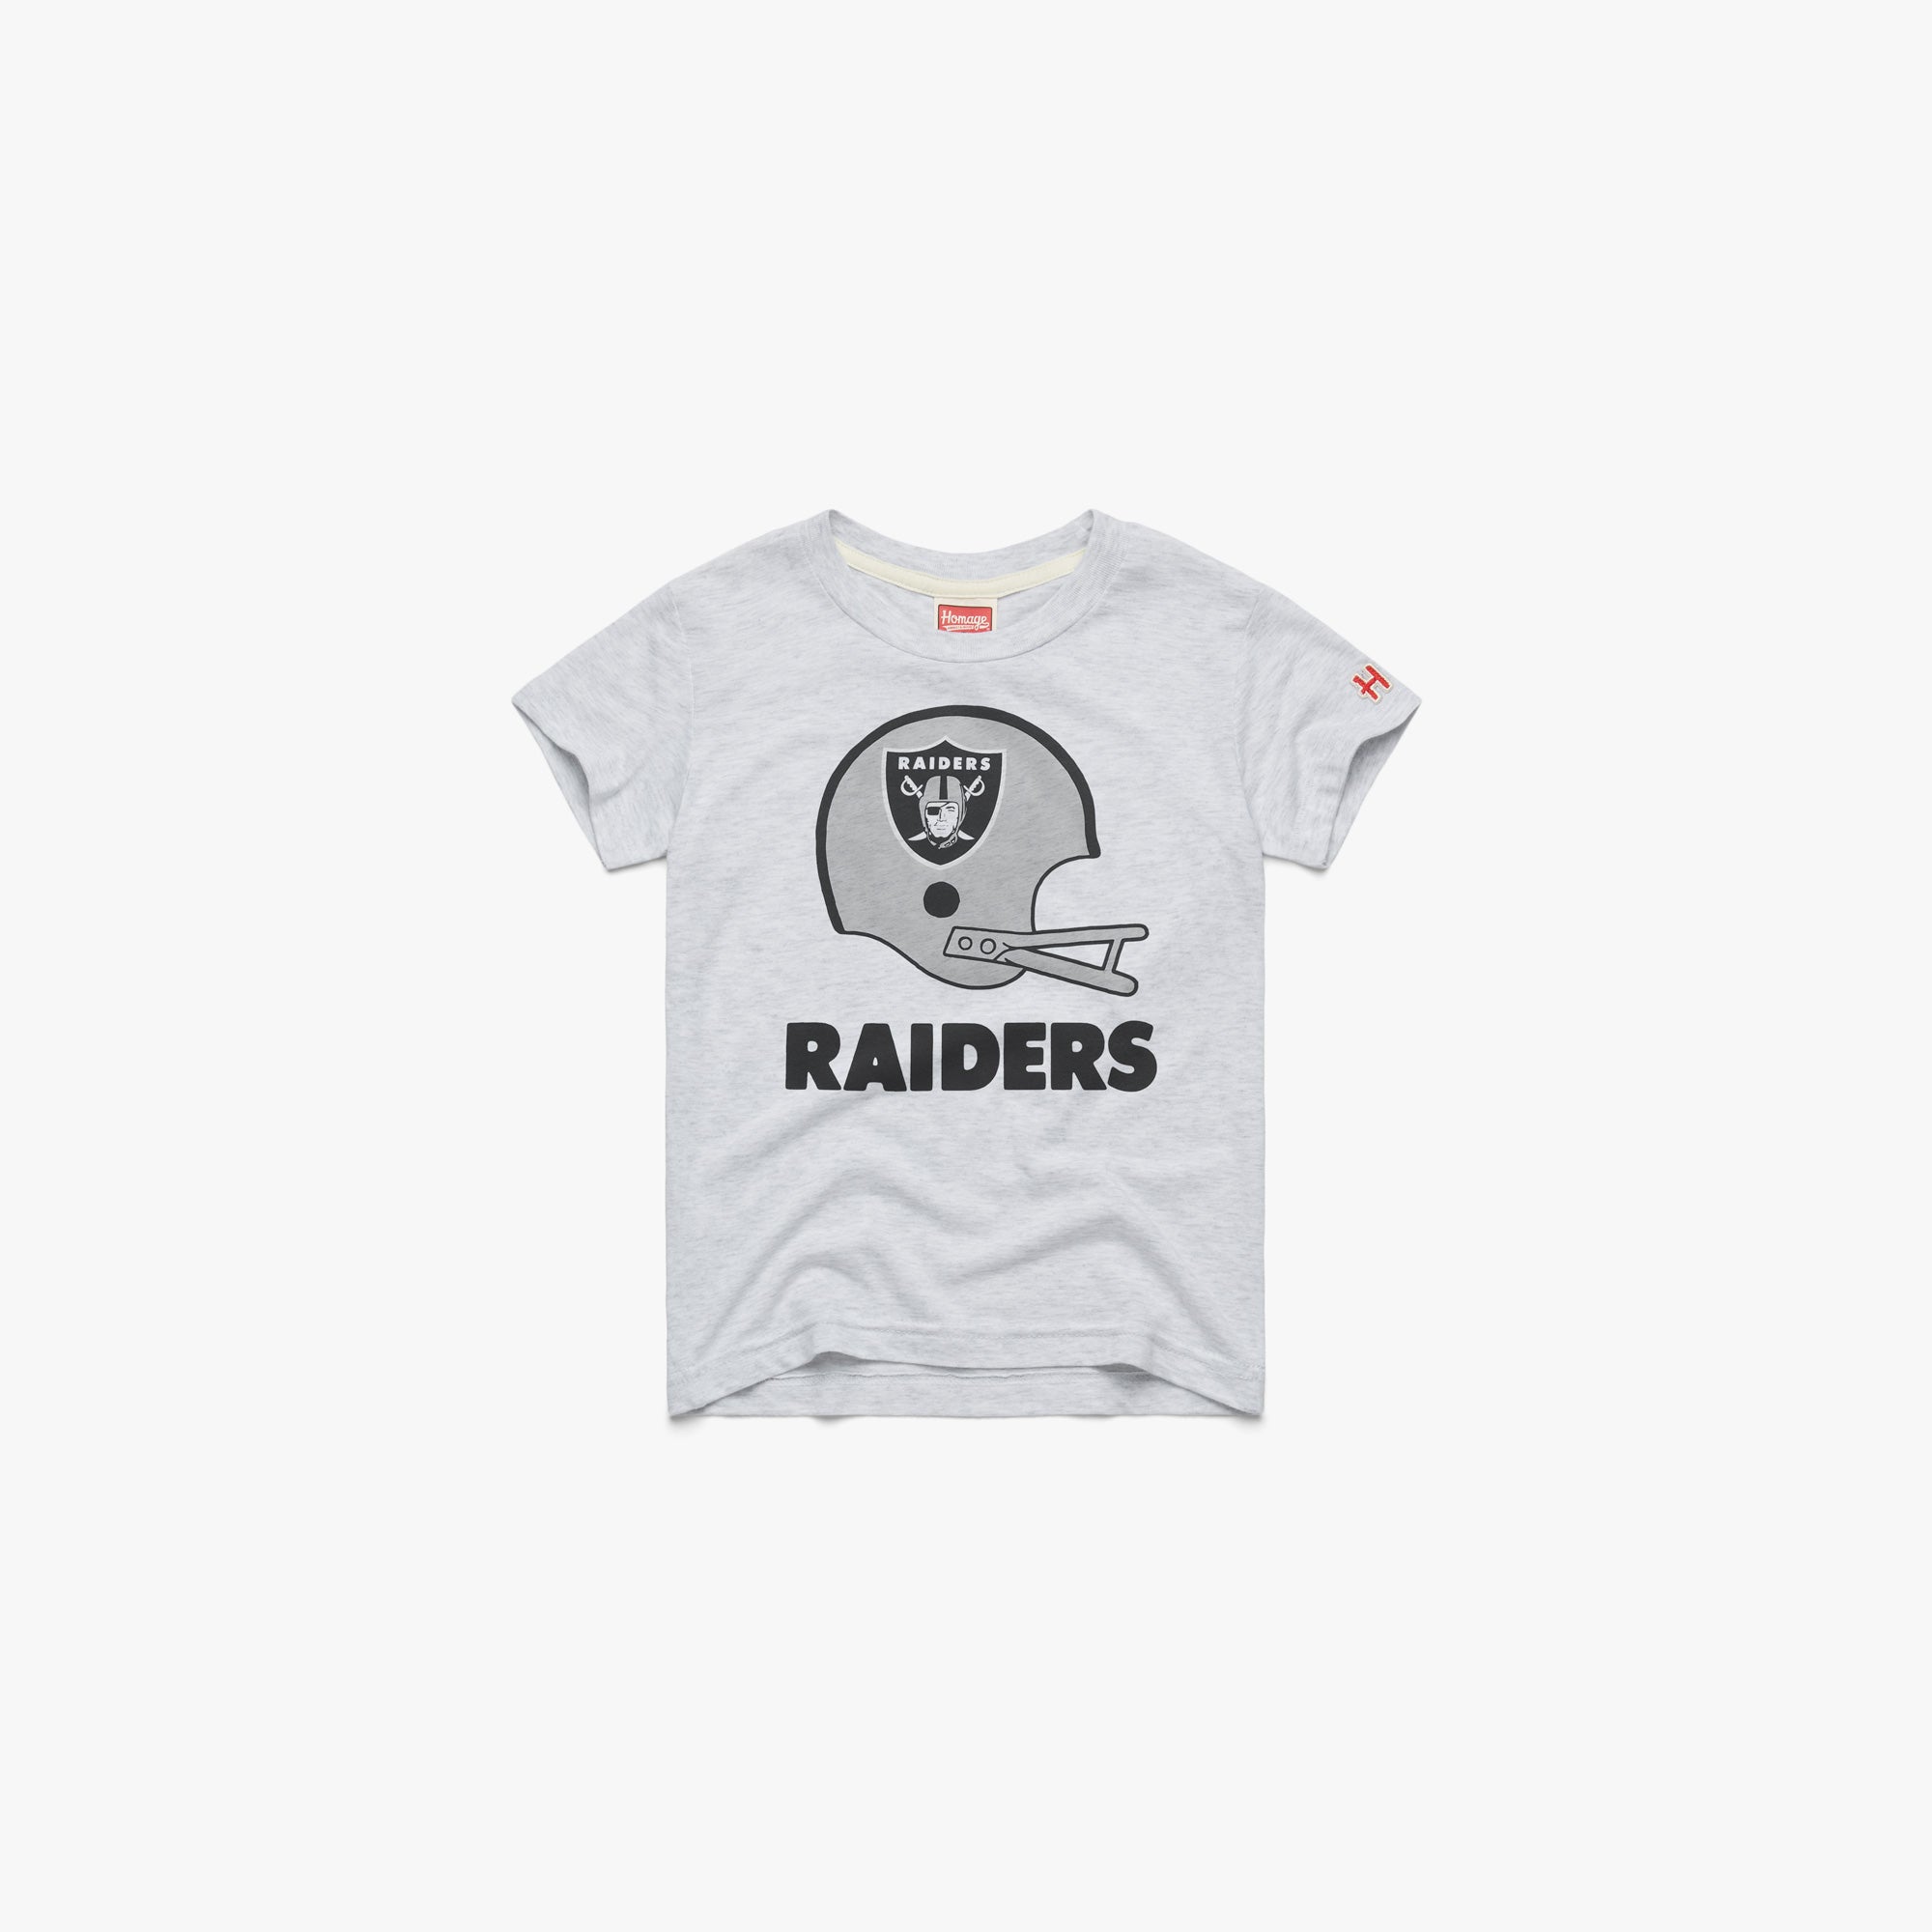 Youth Las Vegas Raiders Big Helmet Youth T-Shirt from Homage. | Officially Licensed Vintage NFL Apparel from Homage Pro Shop.